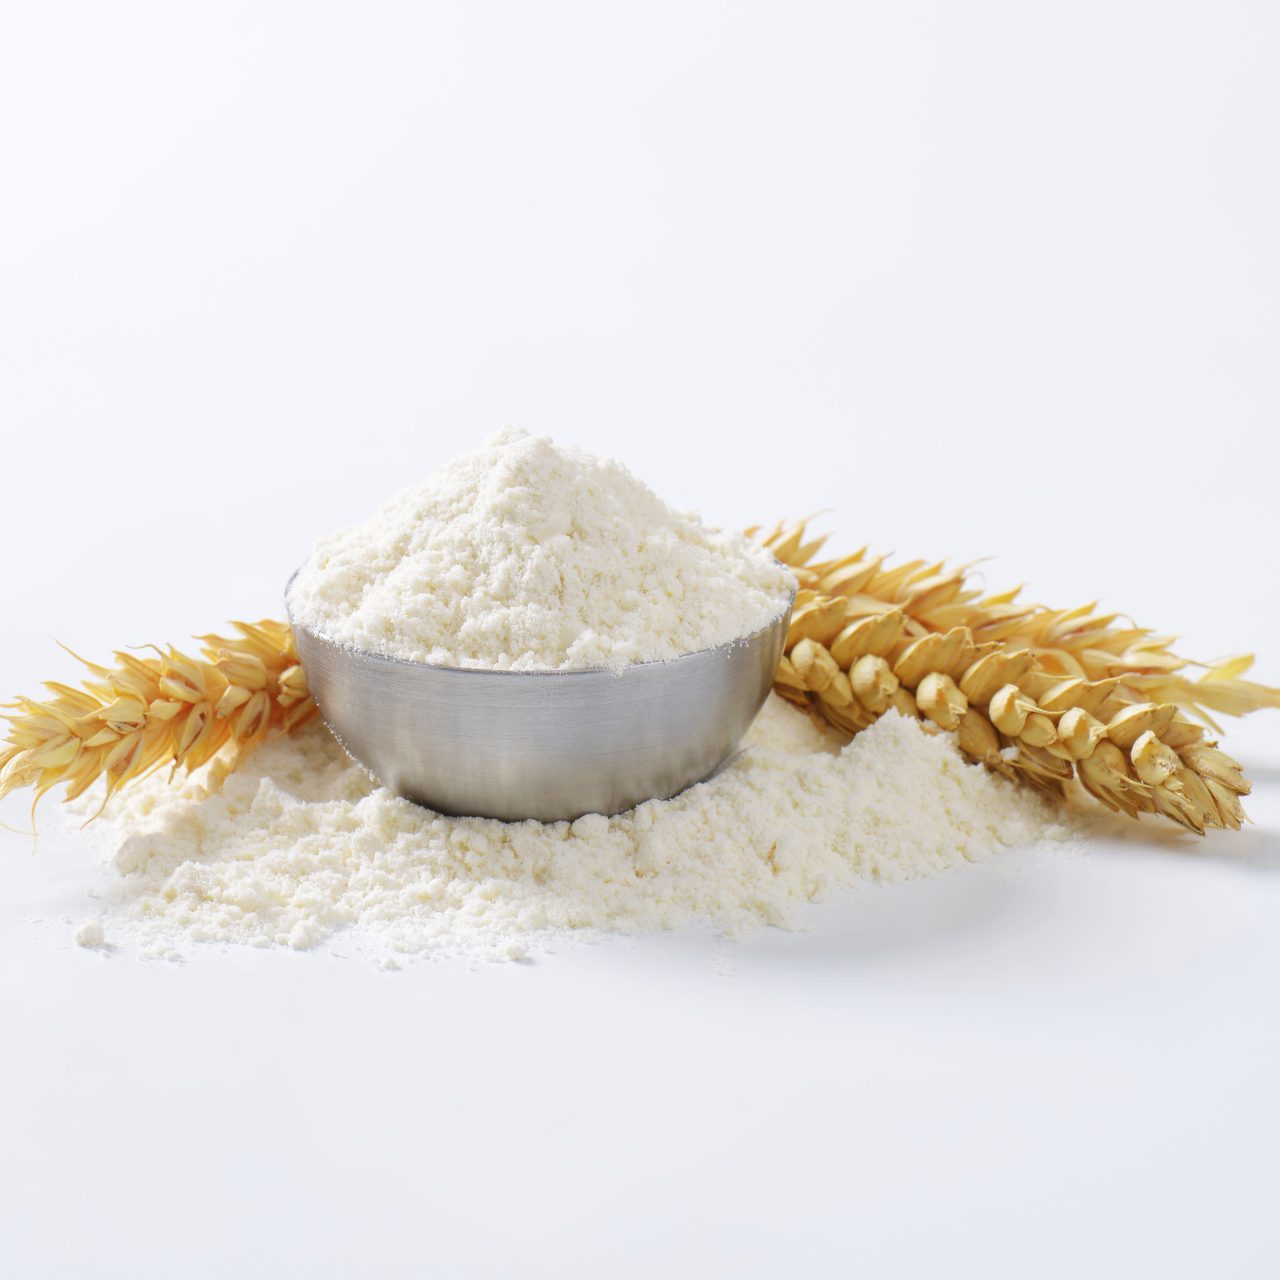 Portion,Of,All-purpose,Flour,With,Two,Grain,Ears